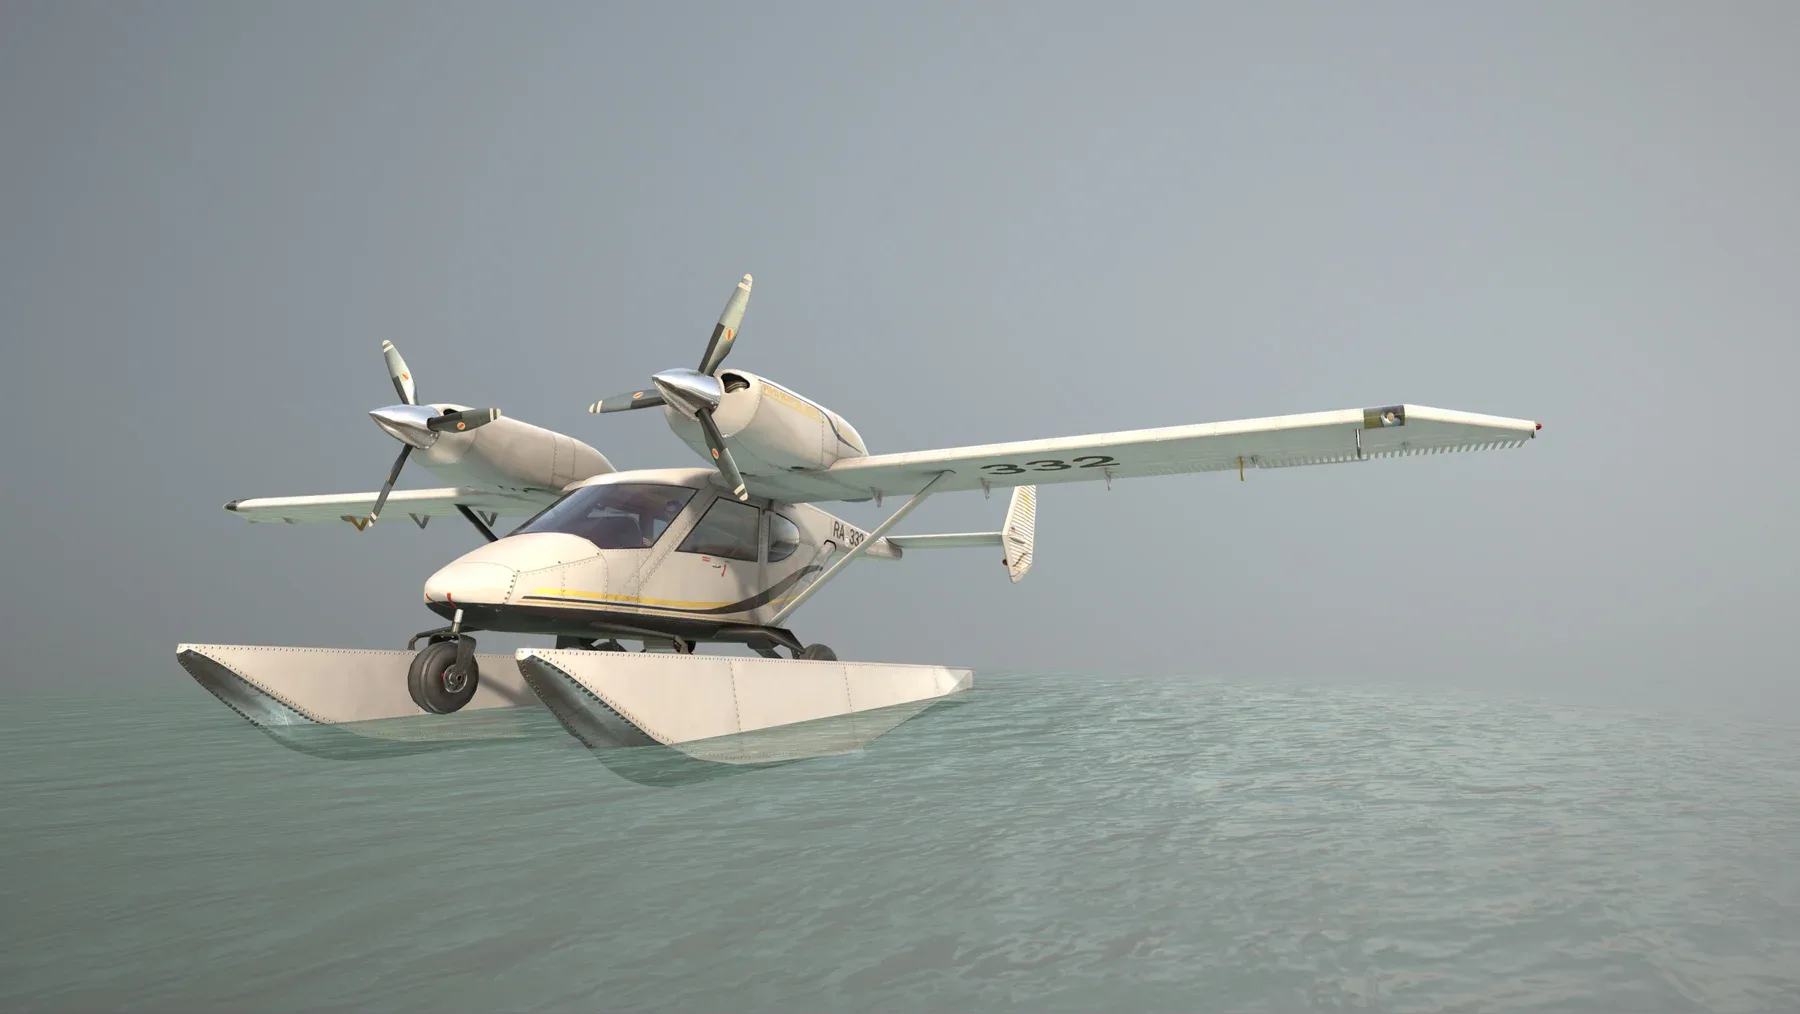 Airplane Accord-201 Floatsplane with four liveries